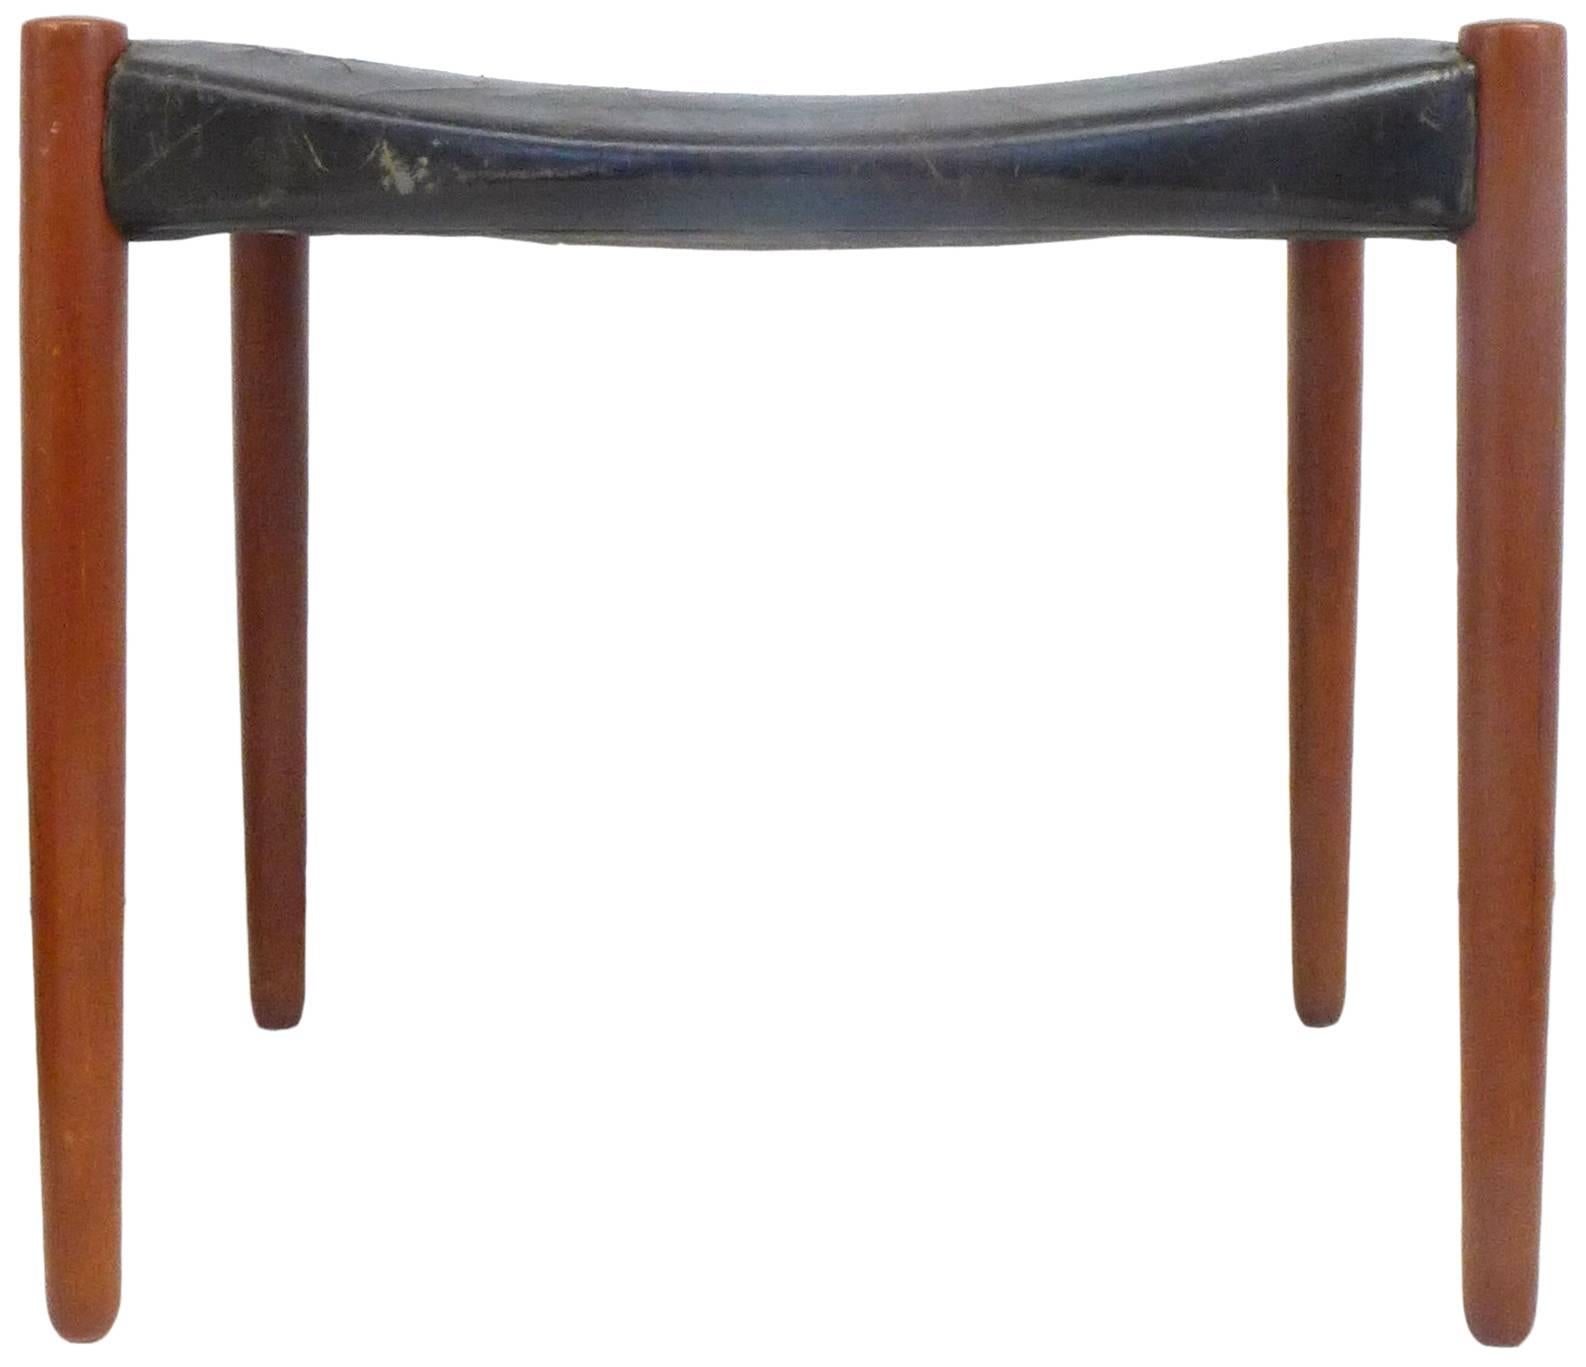 A delightful stool in rosewood and leather designed by Ejner Larsen and A. Bender Madsen for Willy Beck. A subtle and quietly innovative construction: a gently-concave, original-leather seat suspended across four tapered rosewood posts. The